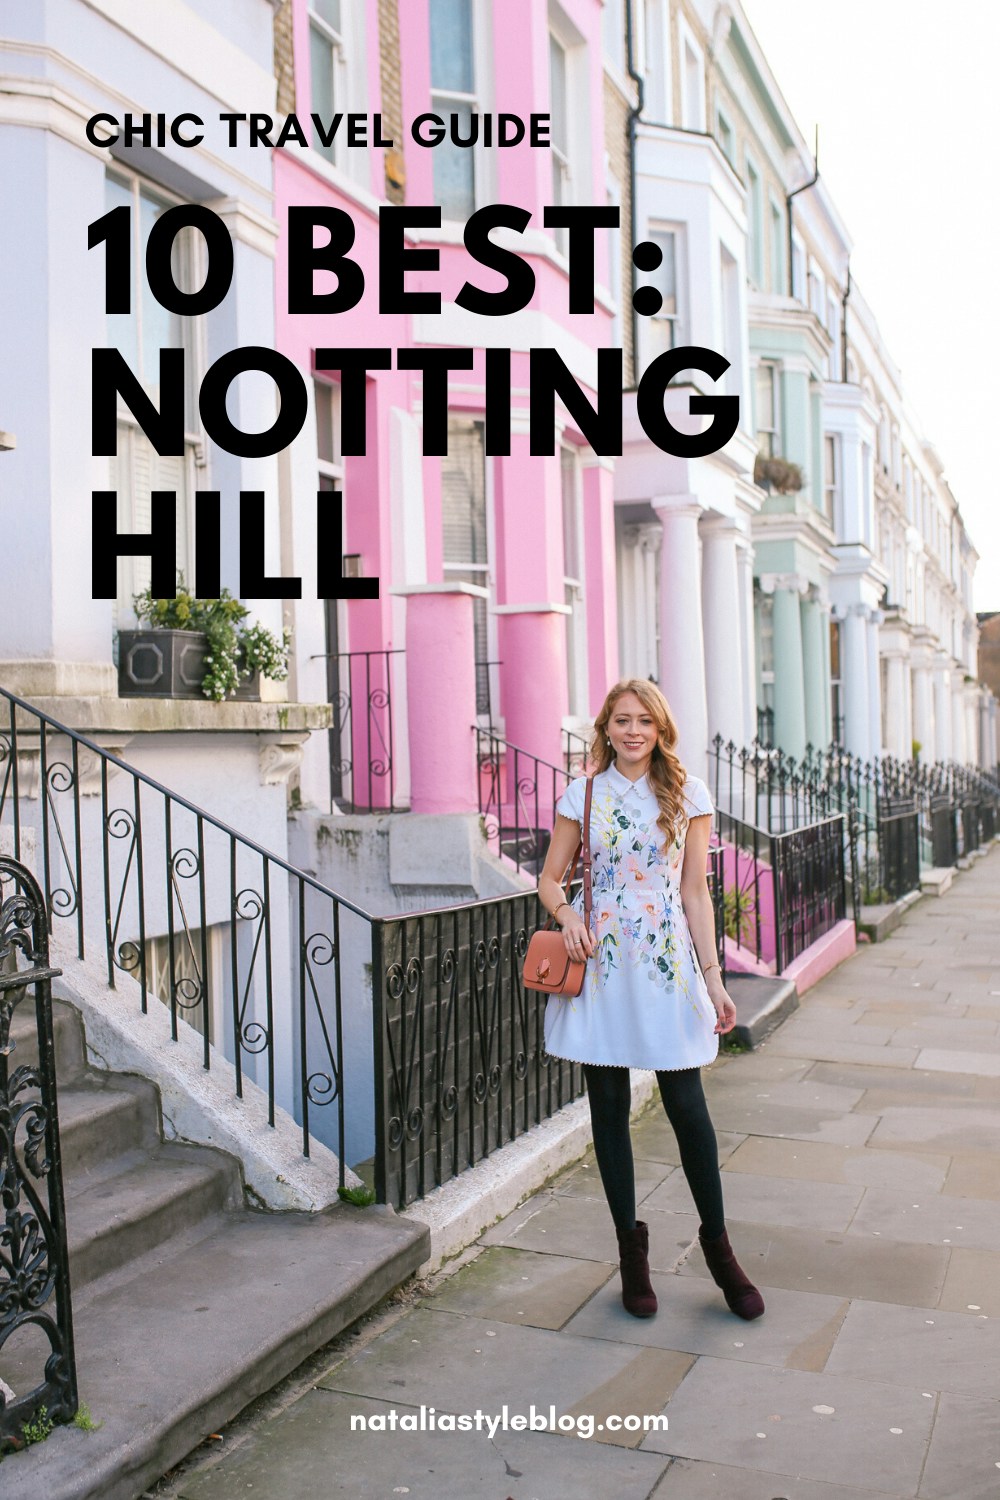 Top 10 Things to do in Notting Hill: from chic shopping to the best pastel houses!